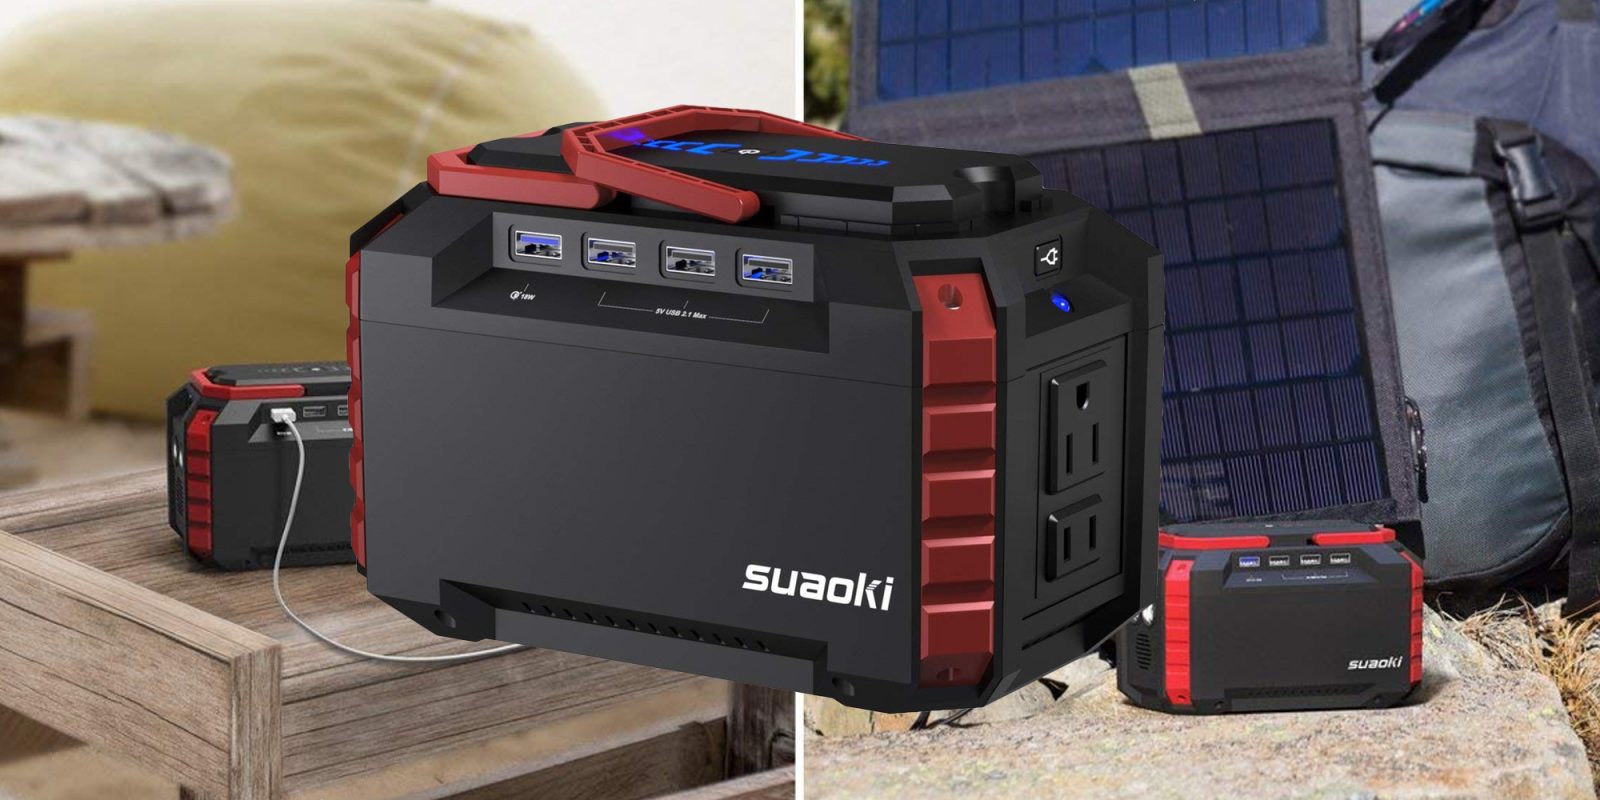 Suaoki's Power Station keeps your gear running w/ a 40500mAh battery at